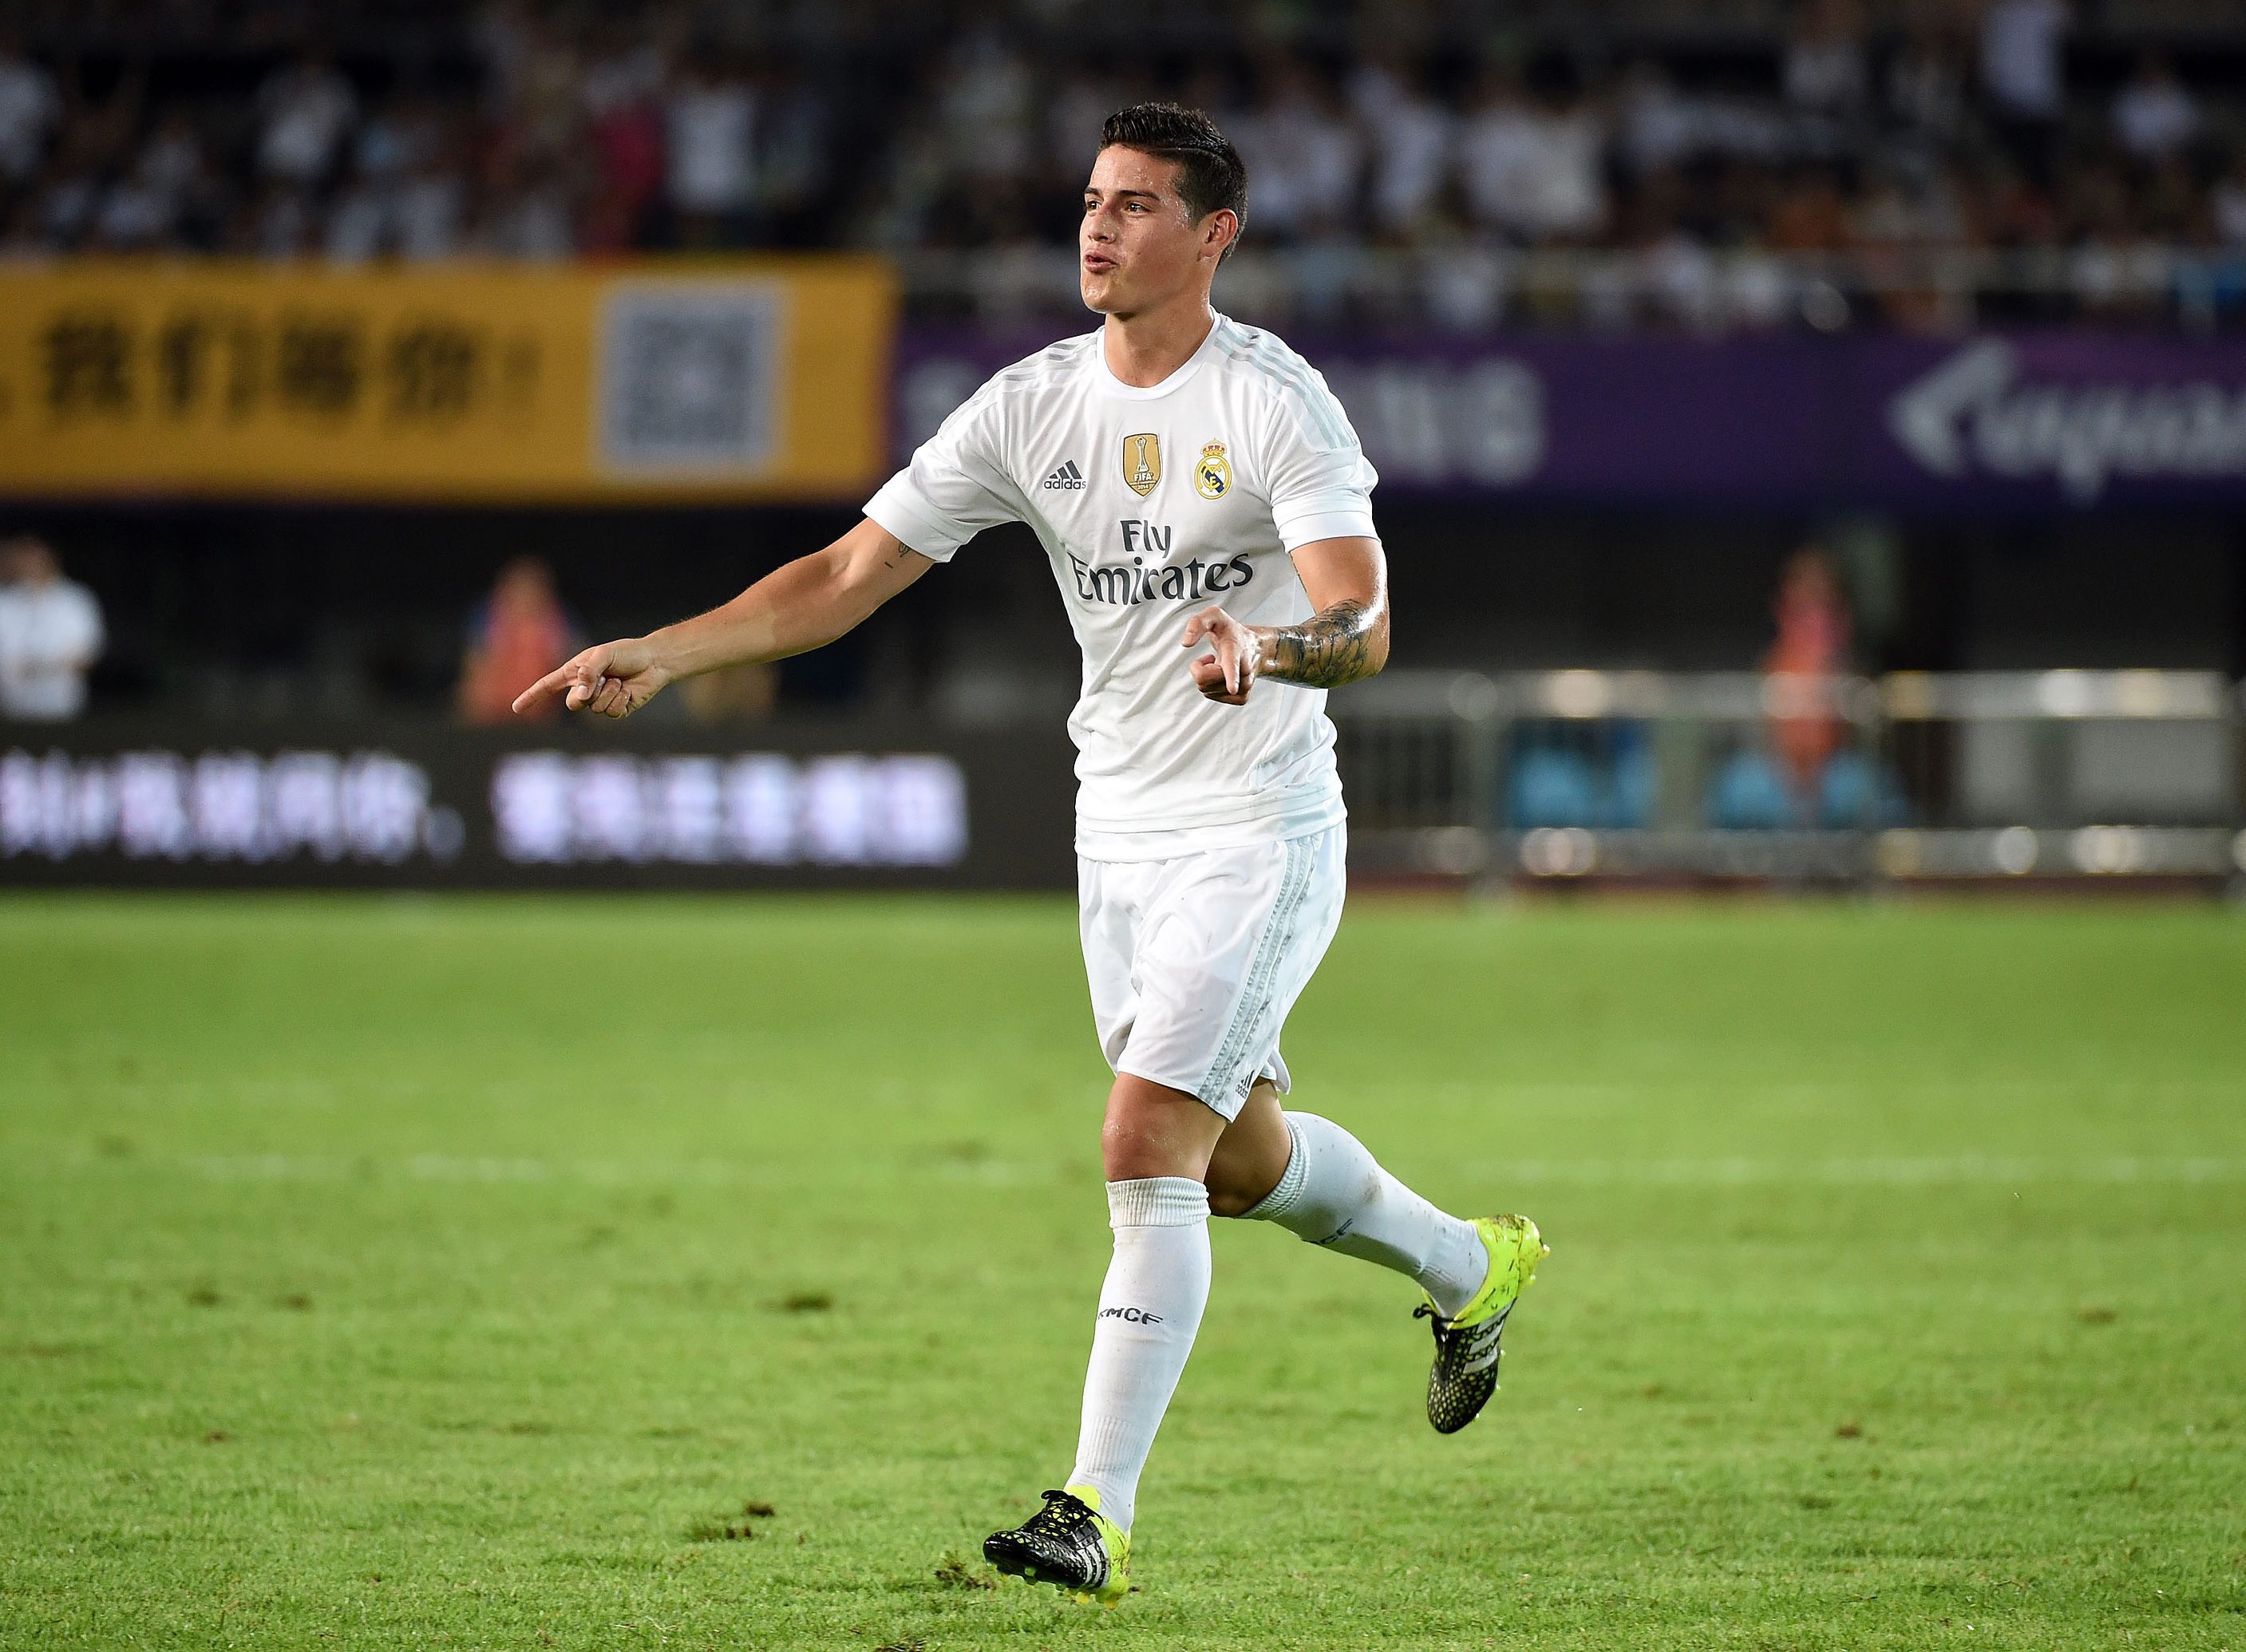 Gareth Bale’s absence is further compounded due to James Rodriguez’s unavailability after he picked up a thigh injury while representing the Colombian national team.